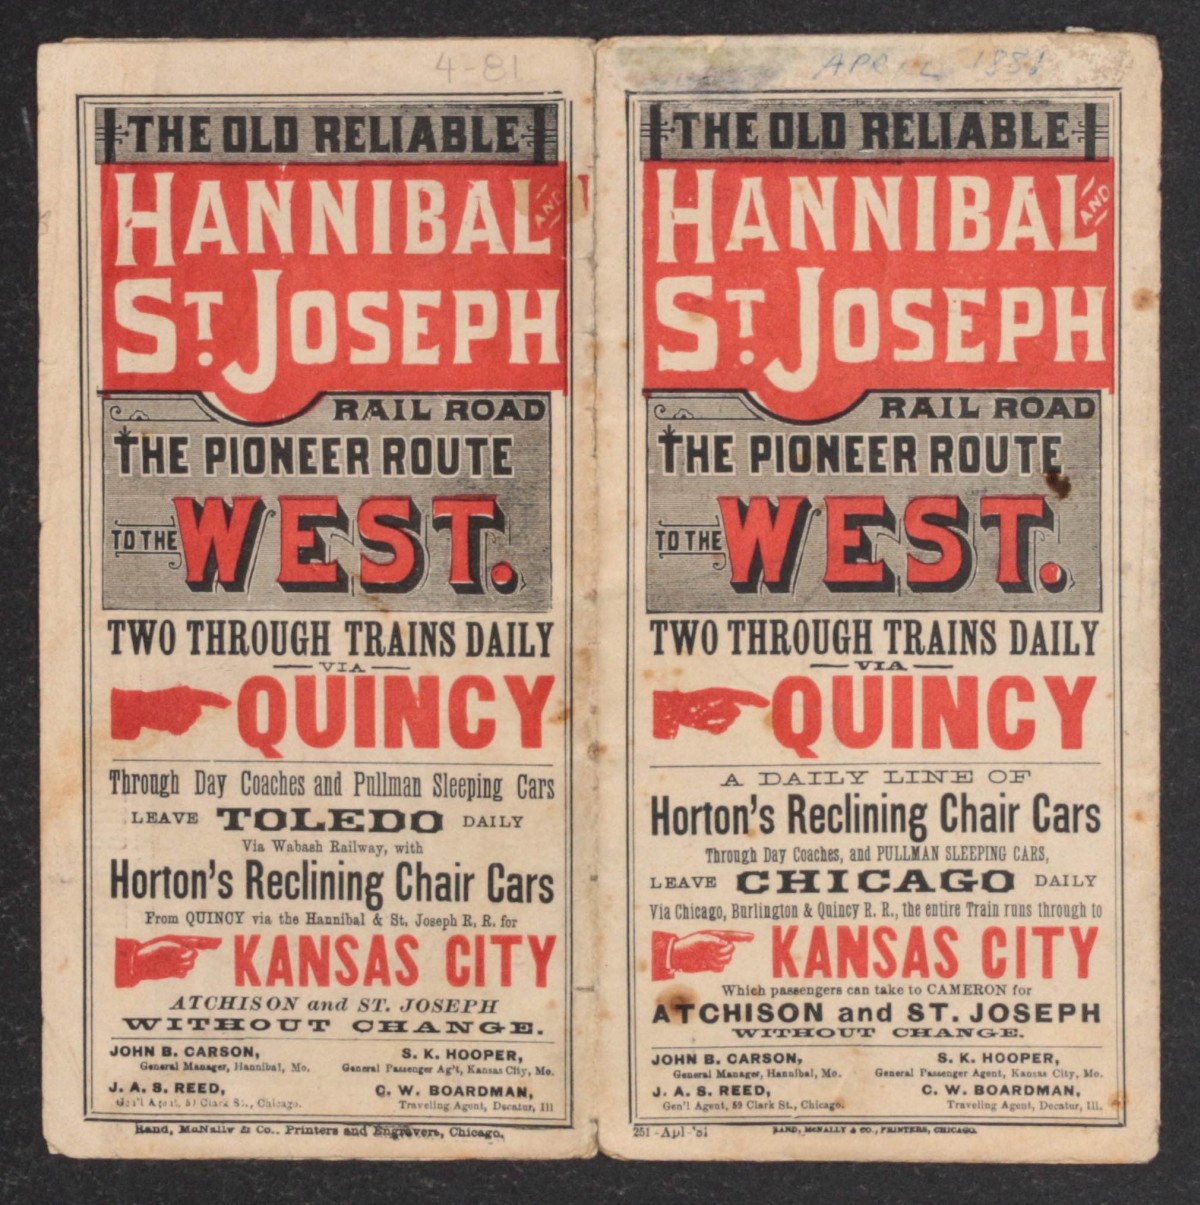 HANNIBAL AND ST. JOSEPH RAILROAD TIMETABLE FOR 1881